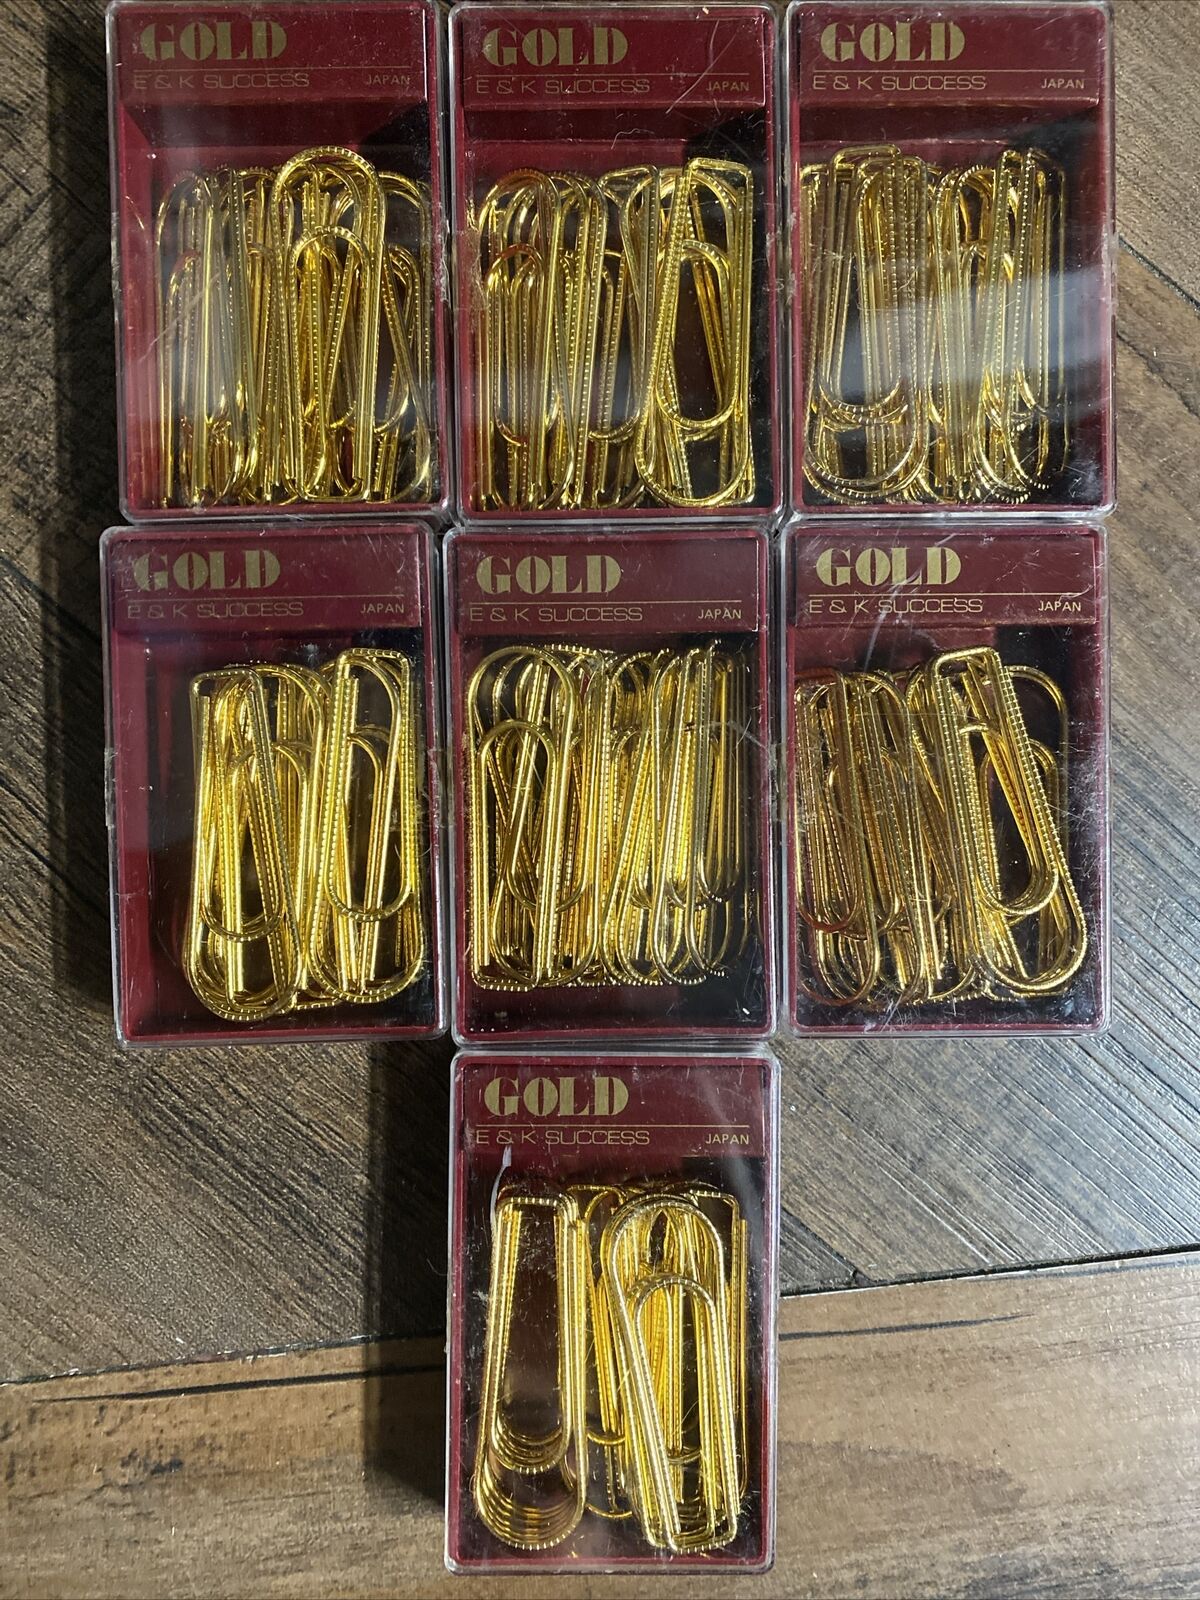 Lot of 7 Vintage E & K Success Large Gold Colored Paper Clips New